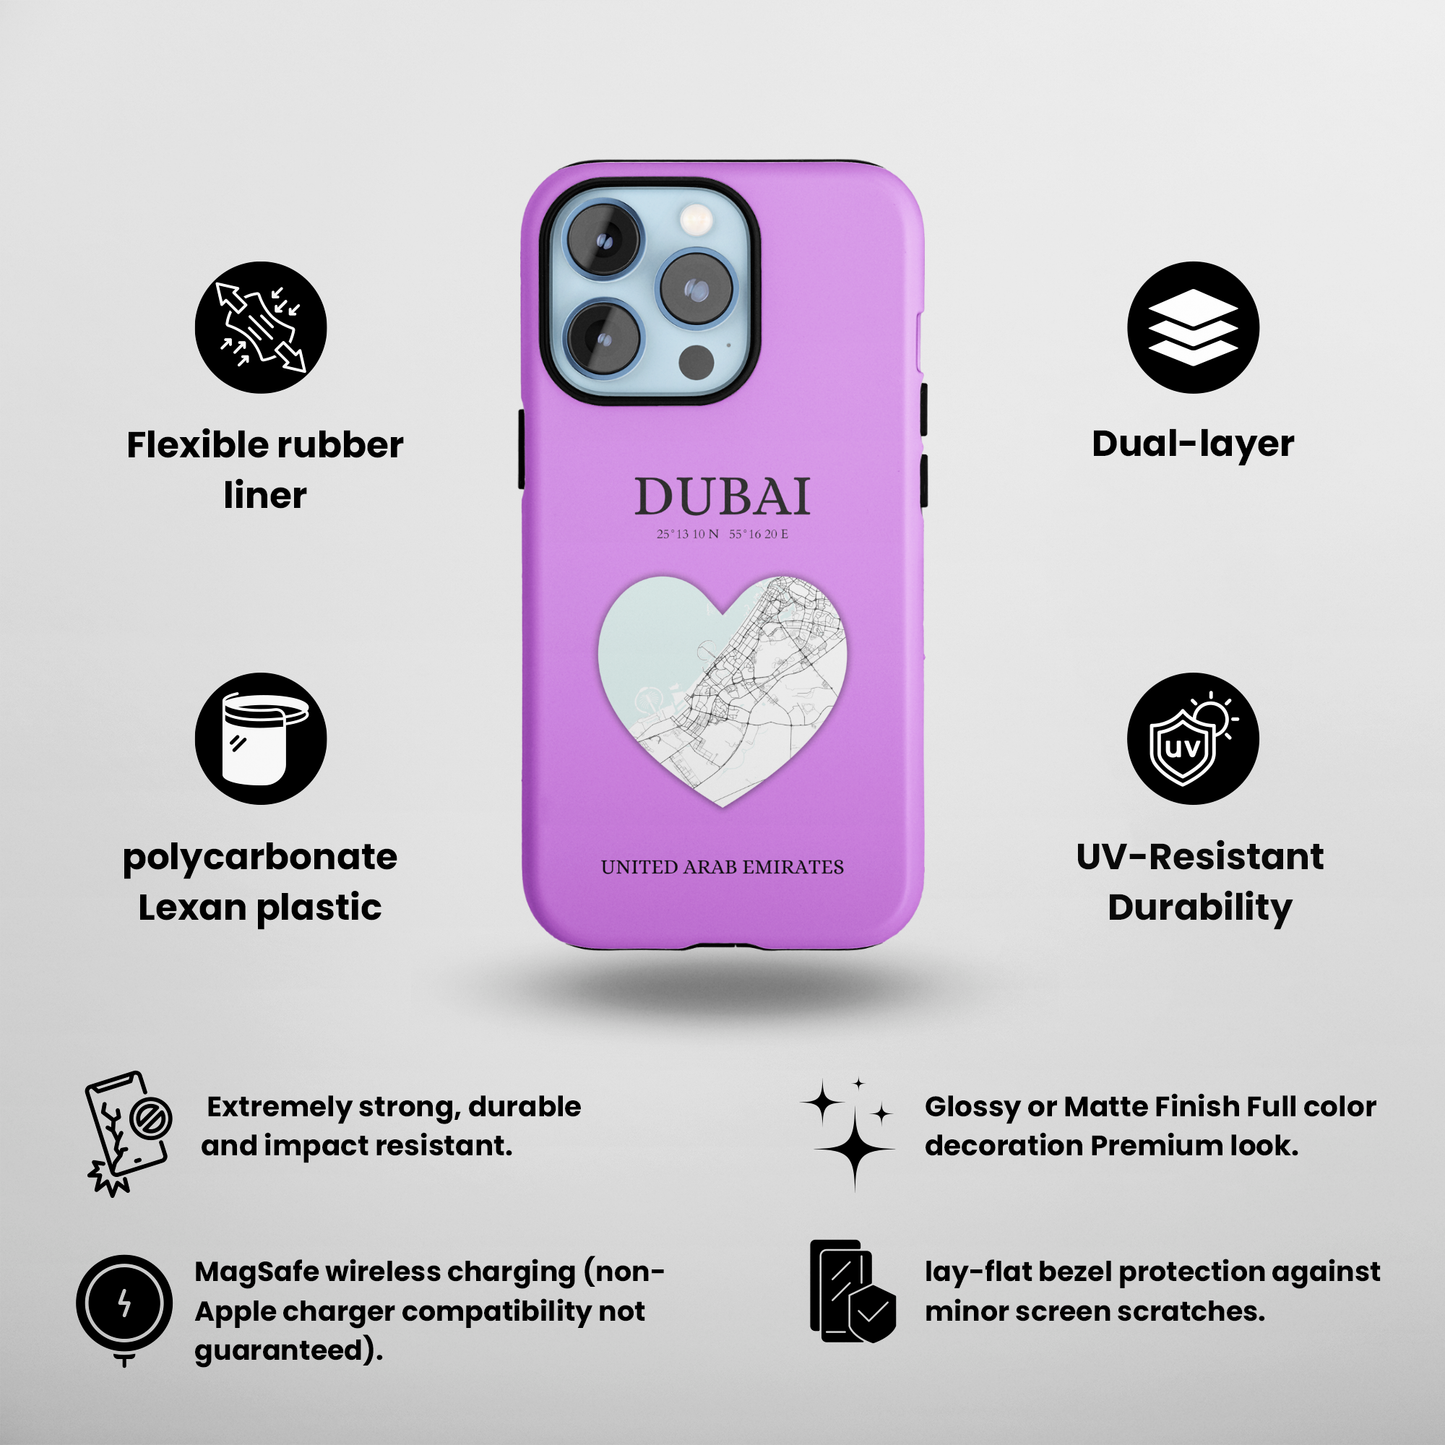 Dubai Heartbeat - Purple (iPhone MagSafe Case)Elevate your iPhone's style with the Dubai Heartbeat Purple MagSafe Case, offering robust protection, MagSafe compatibility, and a choice of matte or glossy finish. RimaGallery